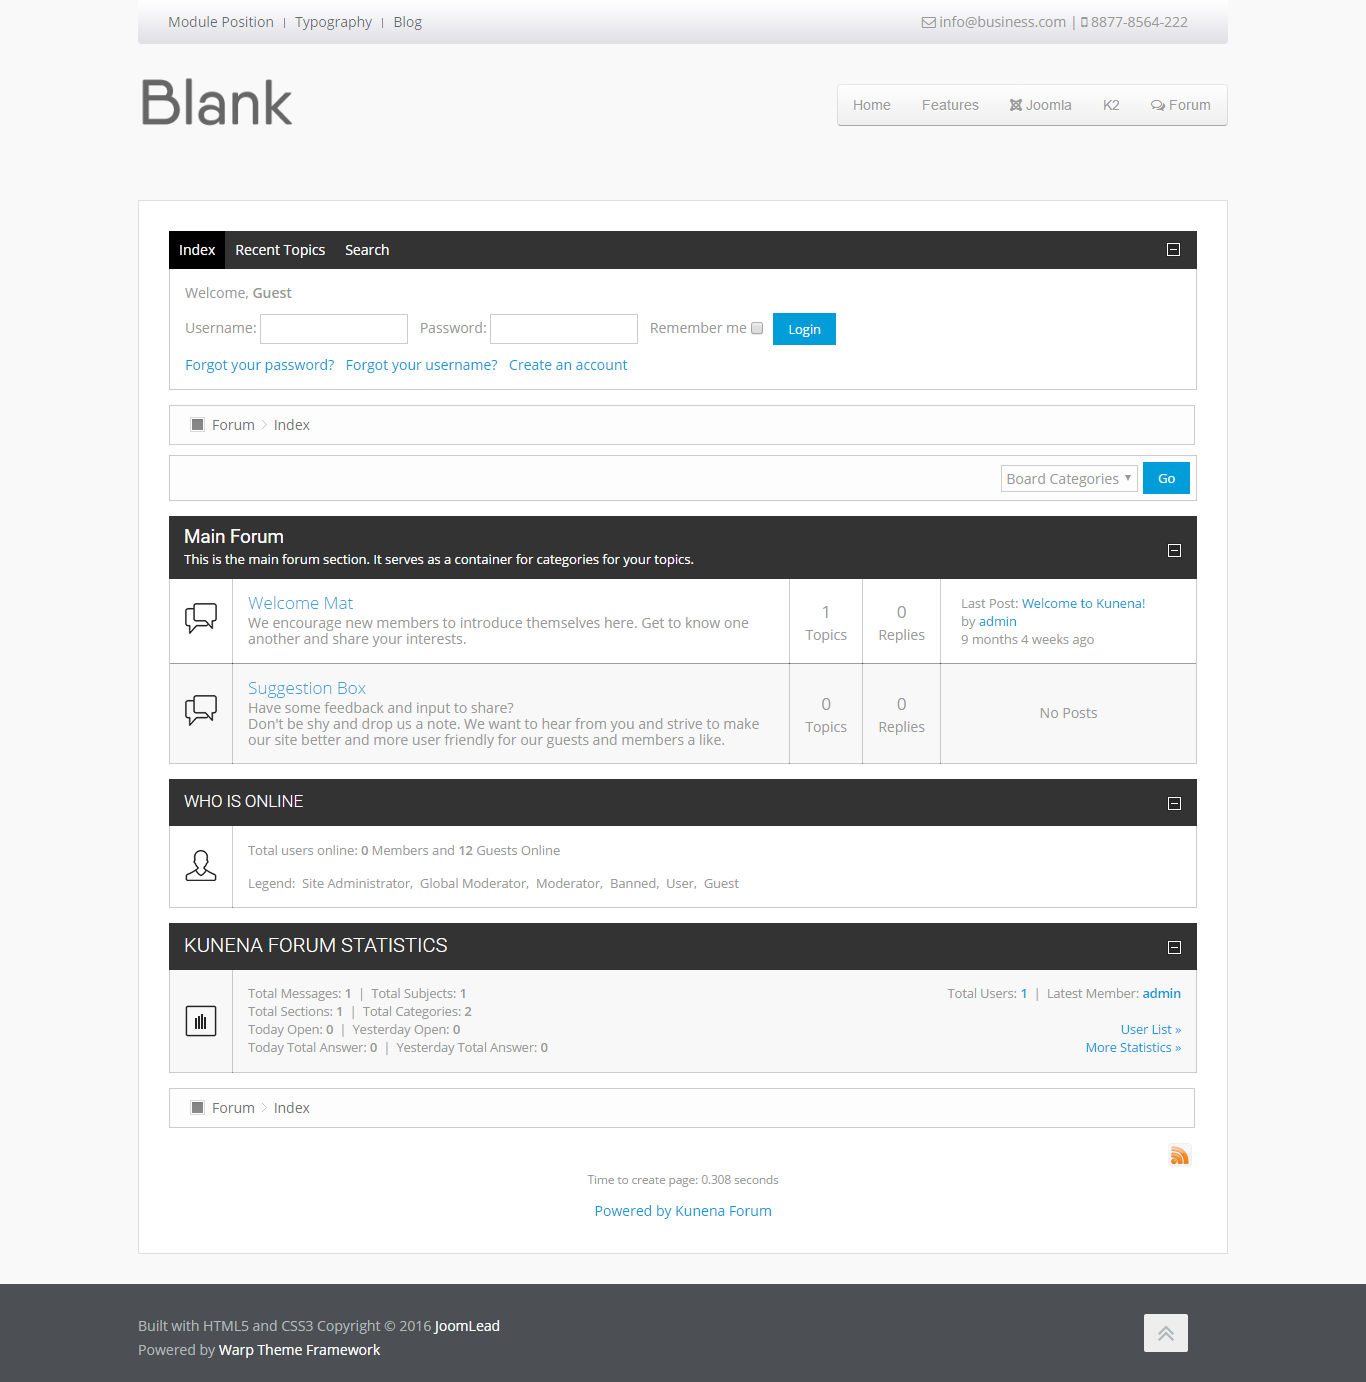 Blank documentation - JoomLead With Html5 Blank Page Template